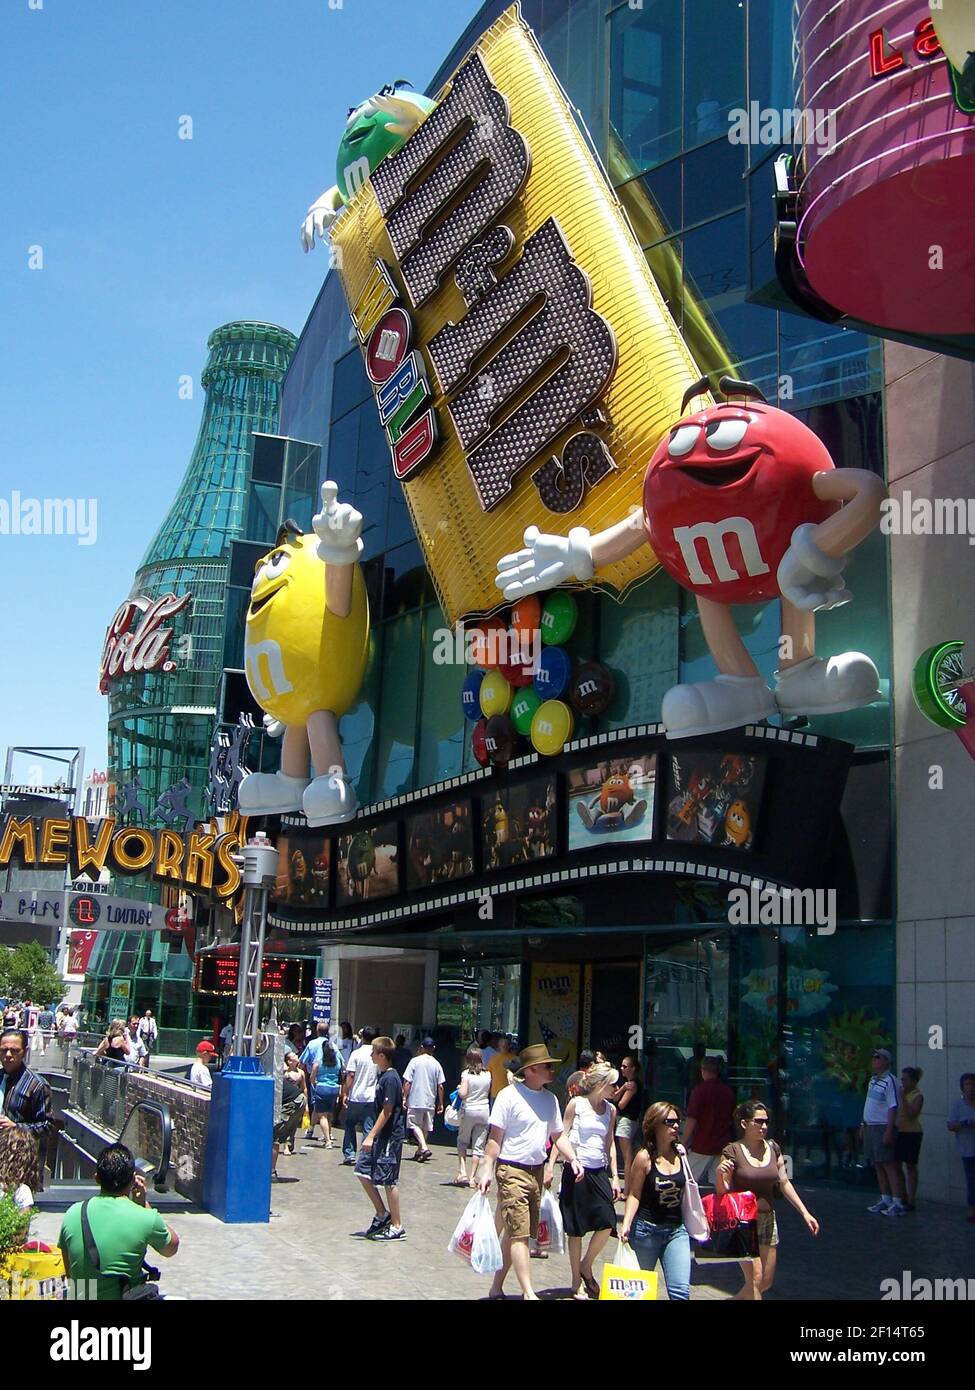 M&M World, at the Showcase Mall in Las Vegas, is a 28,000 square